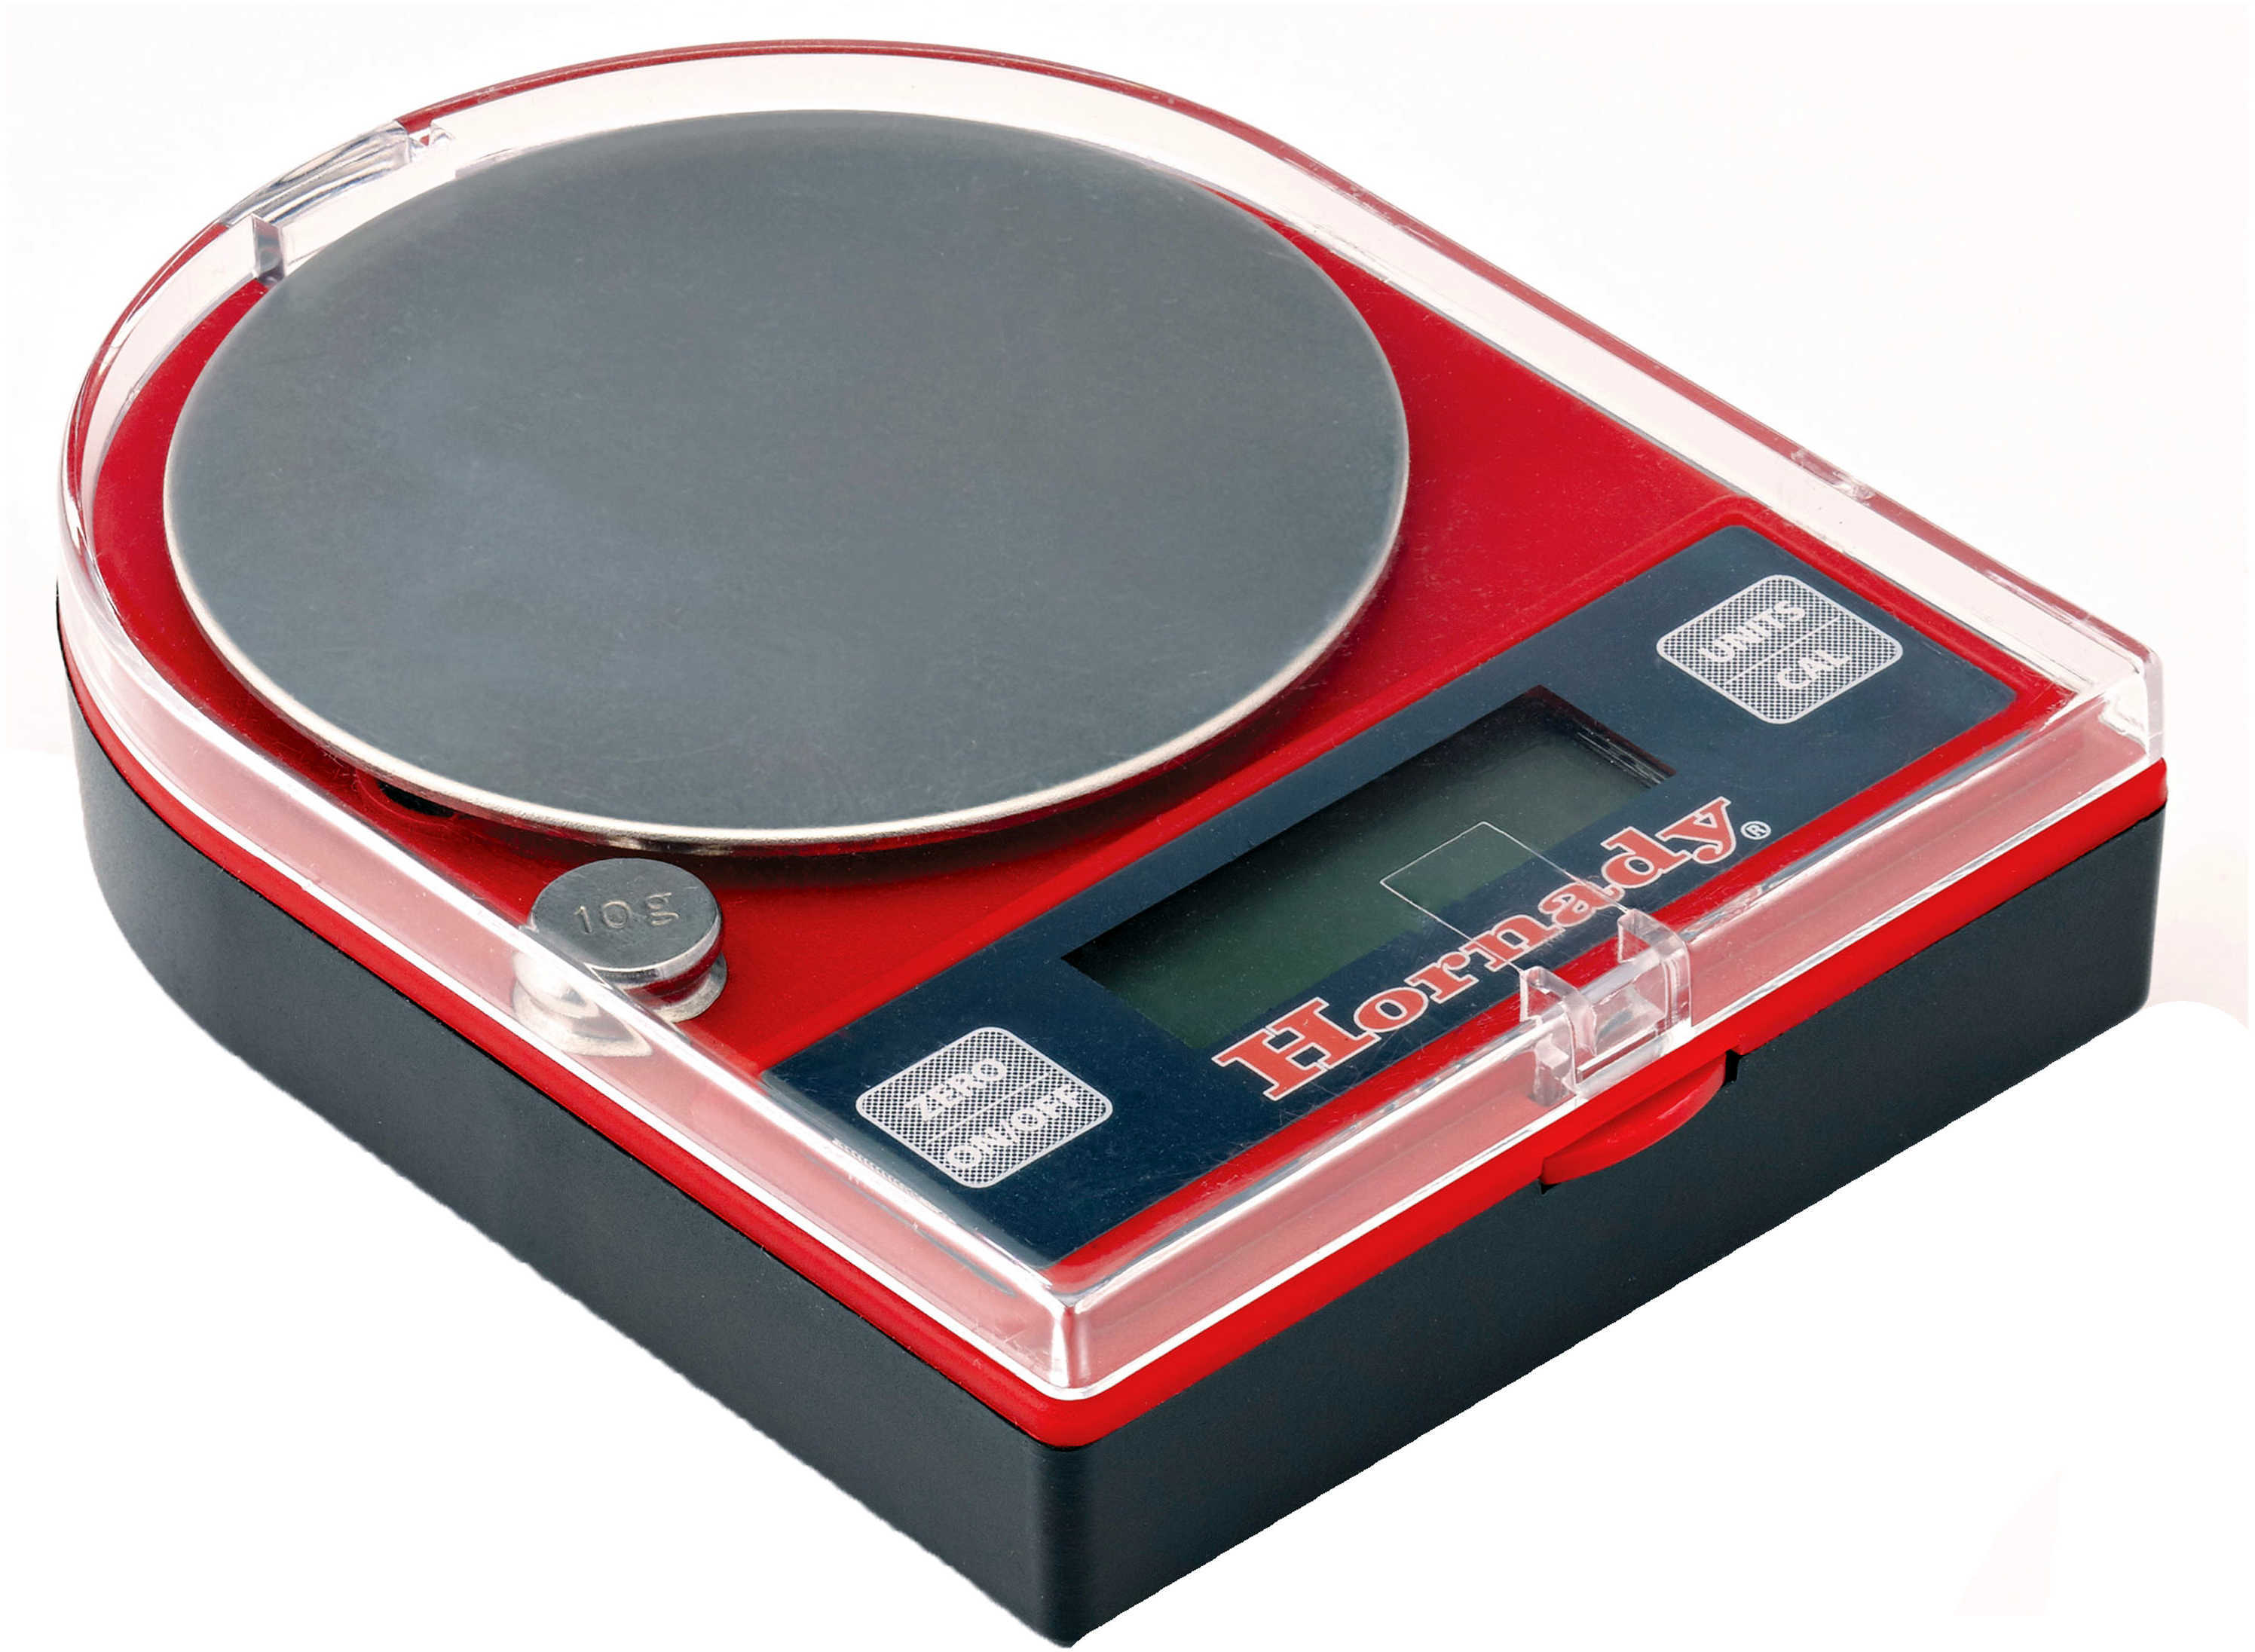 Hornady G2-1500 Electronic Powder Scale With 1500 Grain Capacity Md: 050106